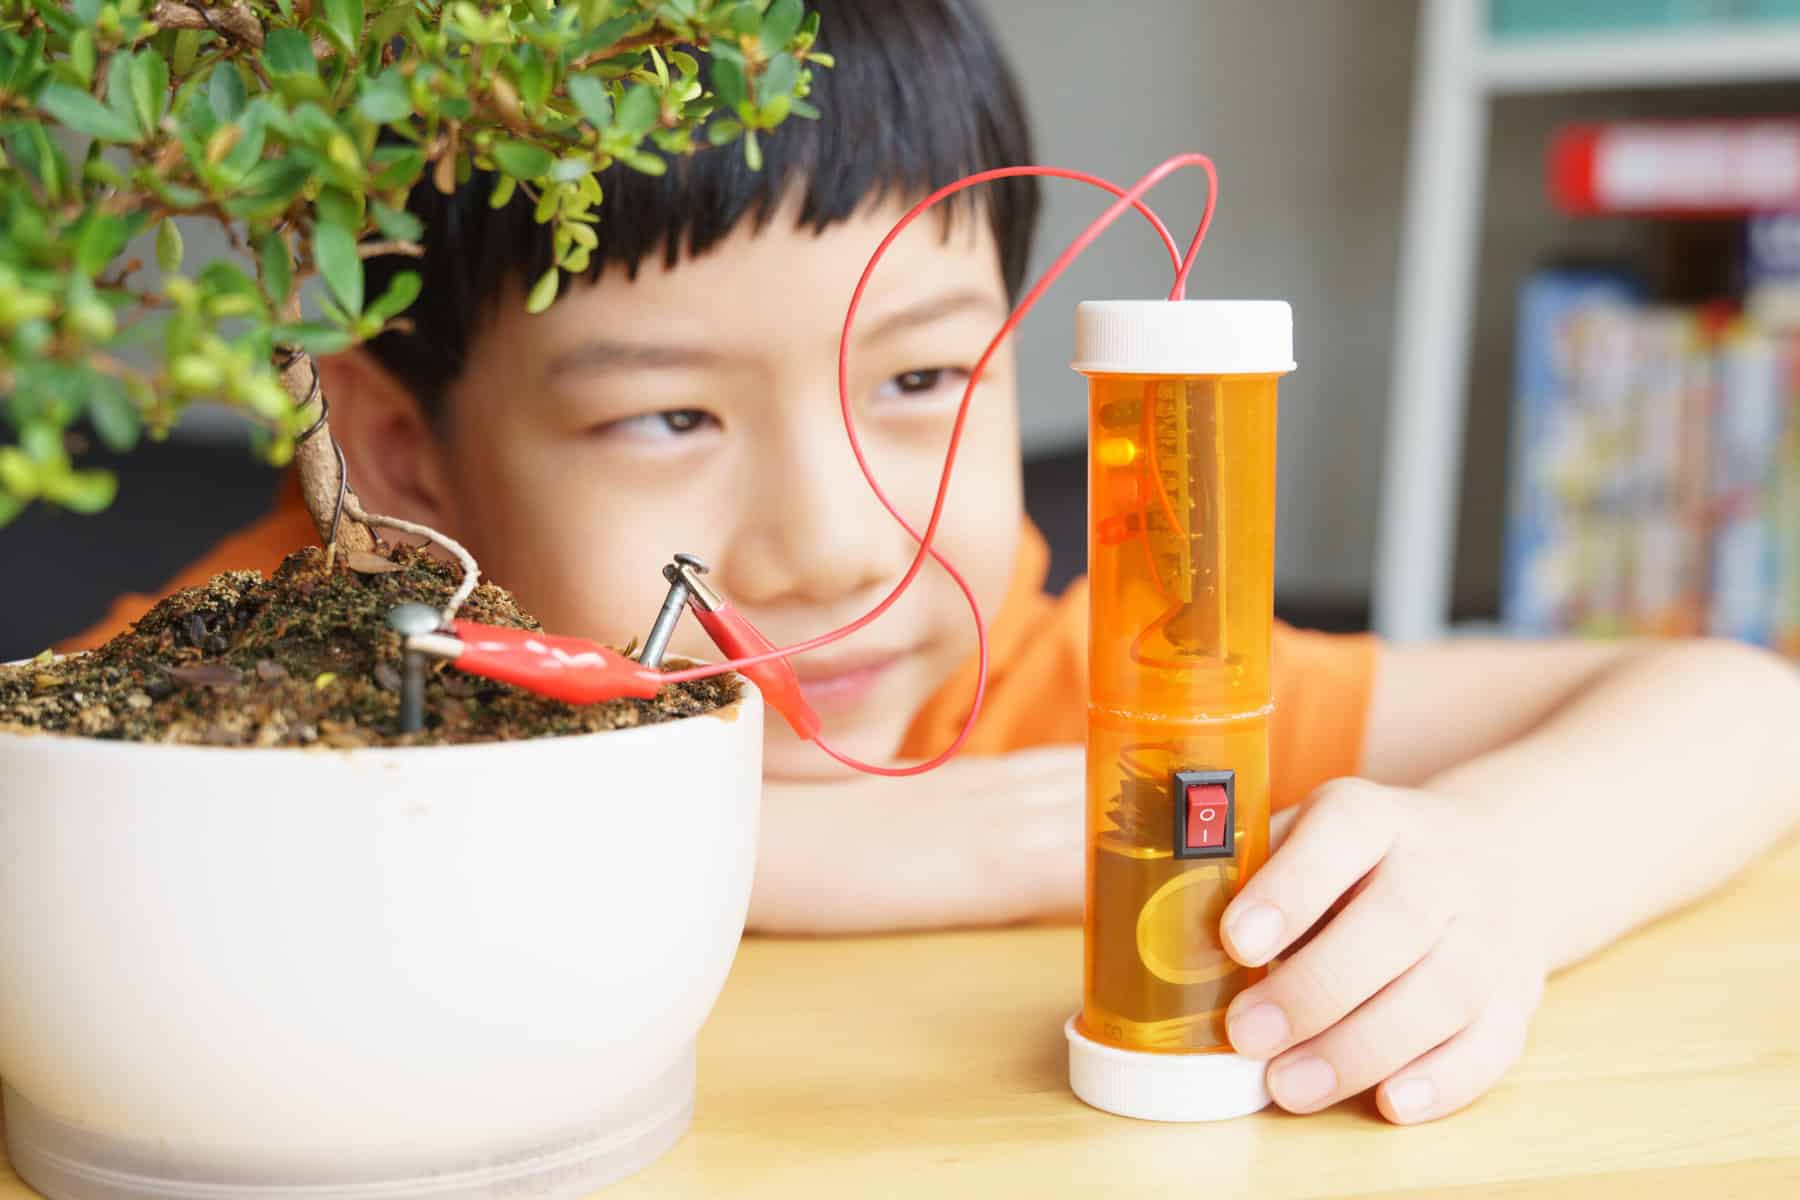 little boy doing a science experiment with a potted plant